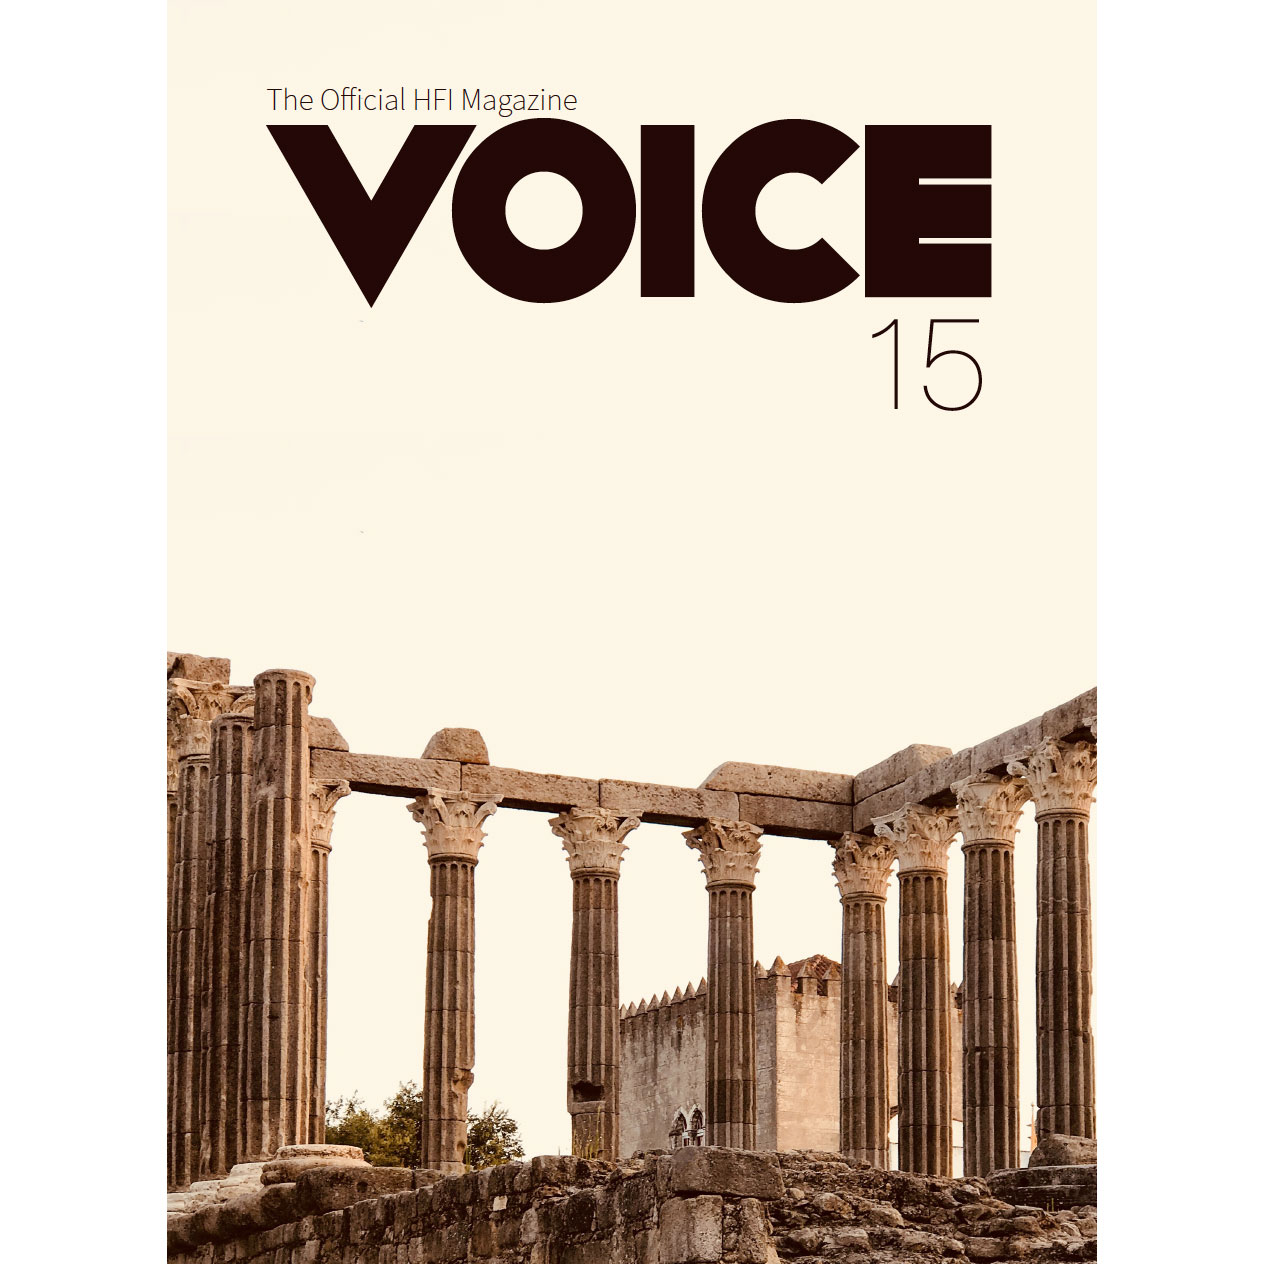 The Official HFI Magazine VOICE 15